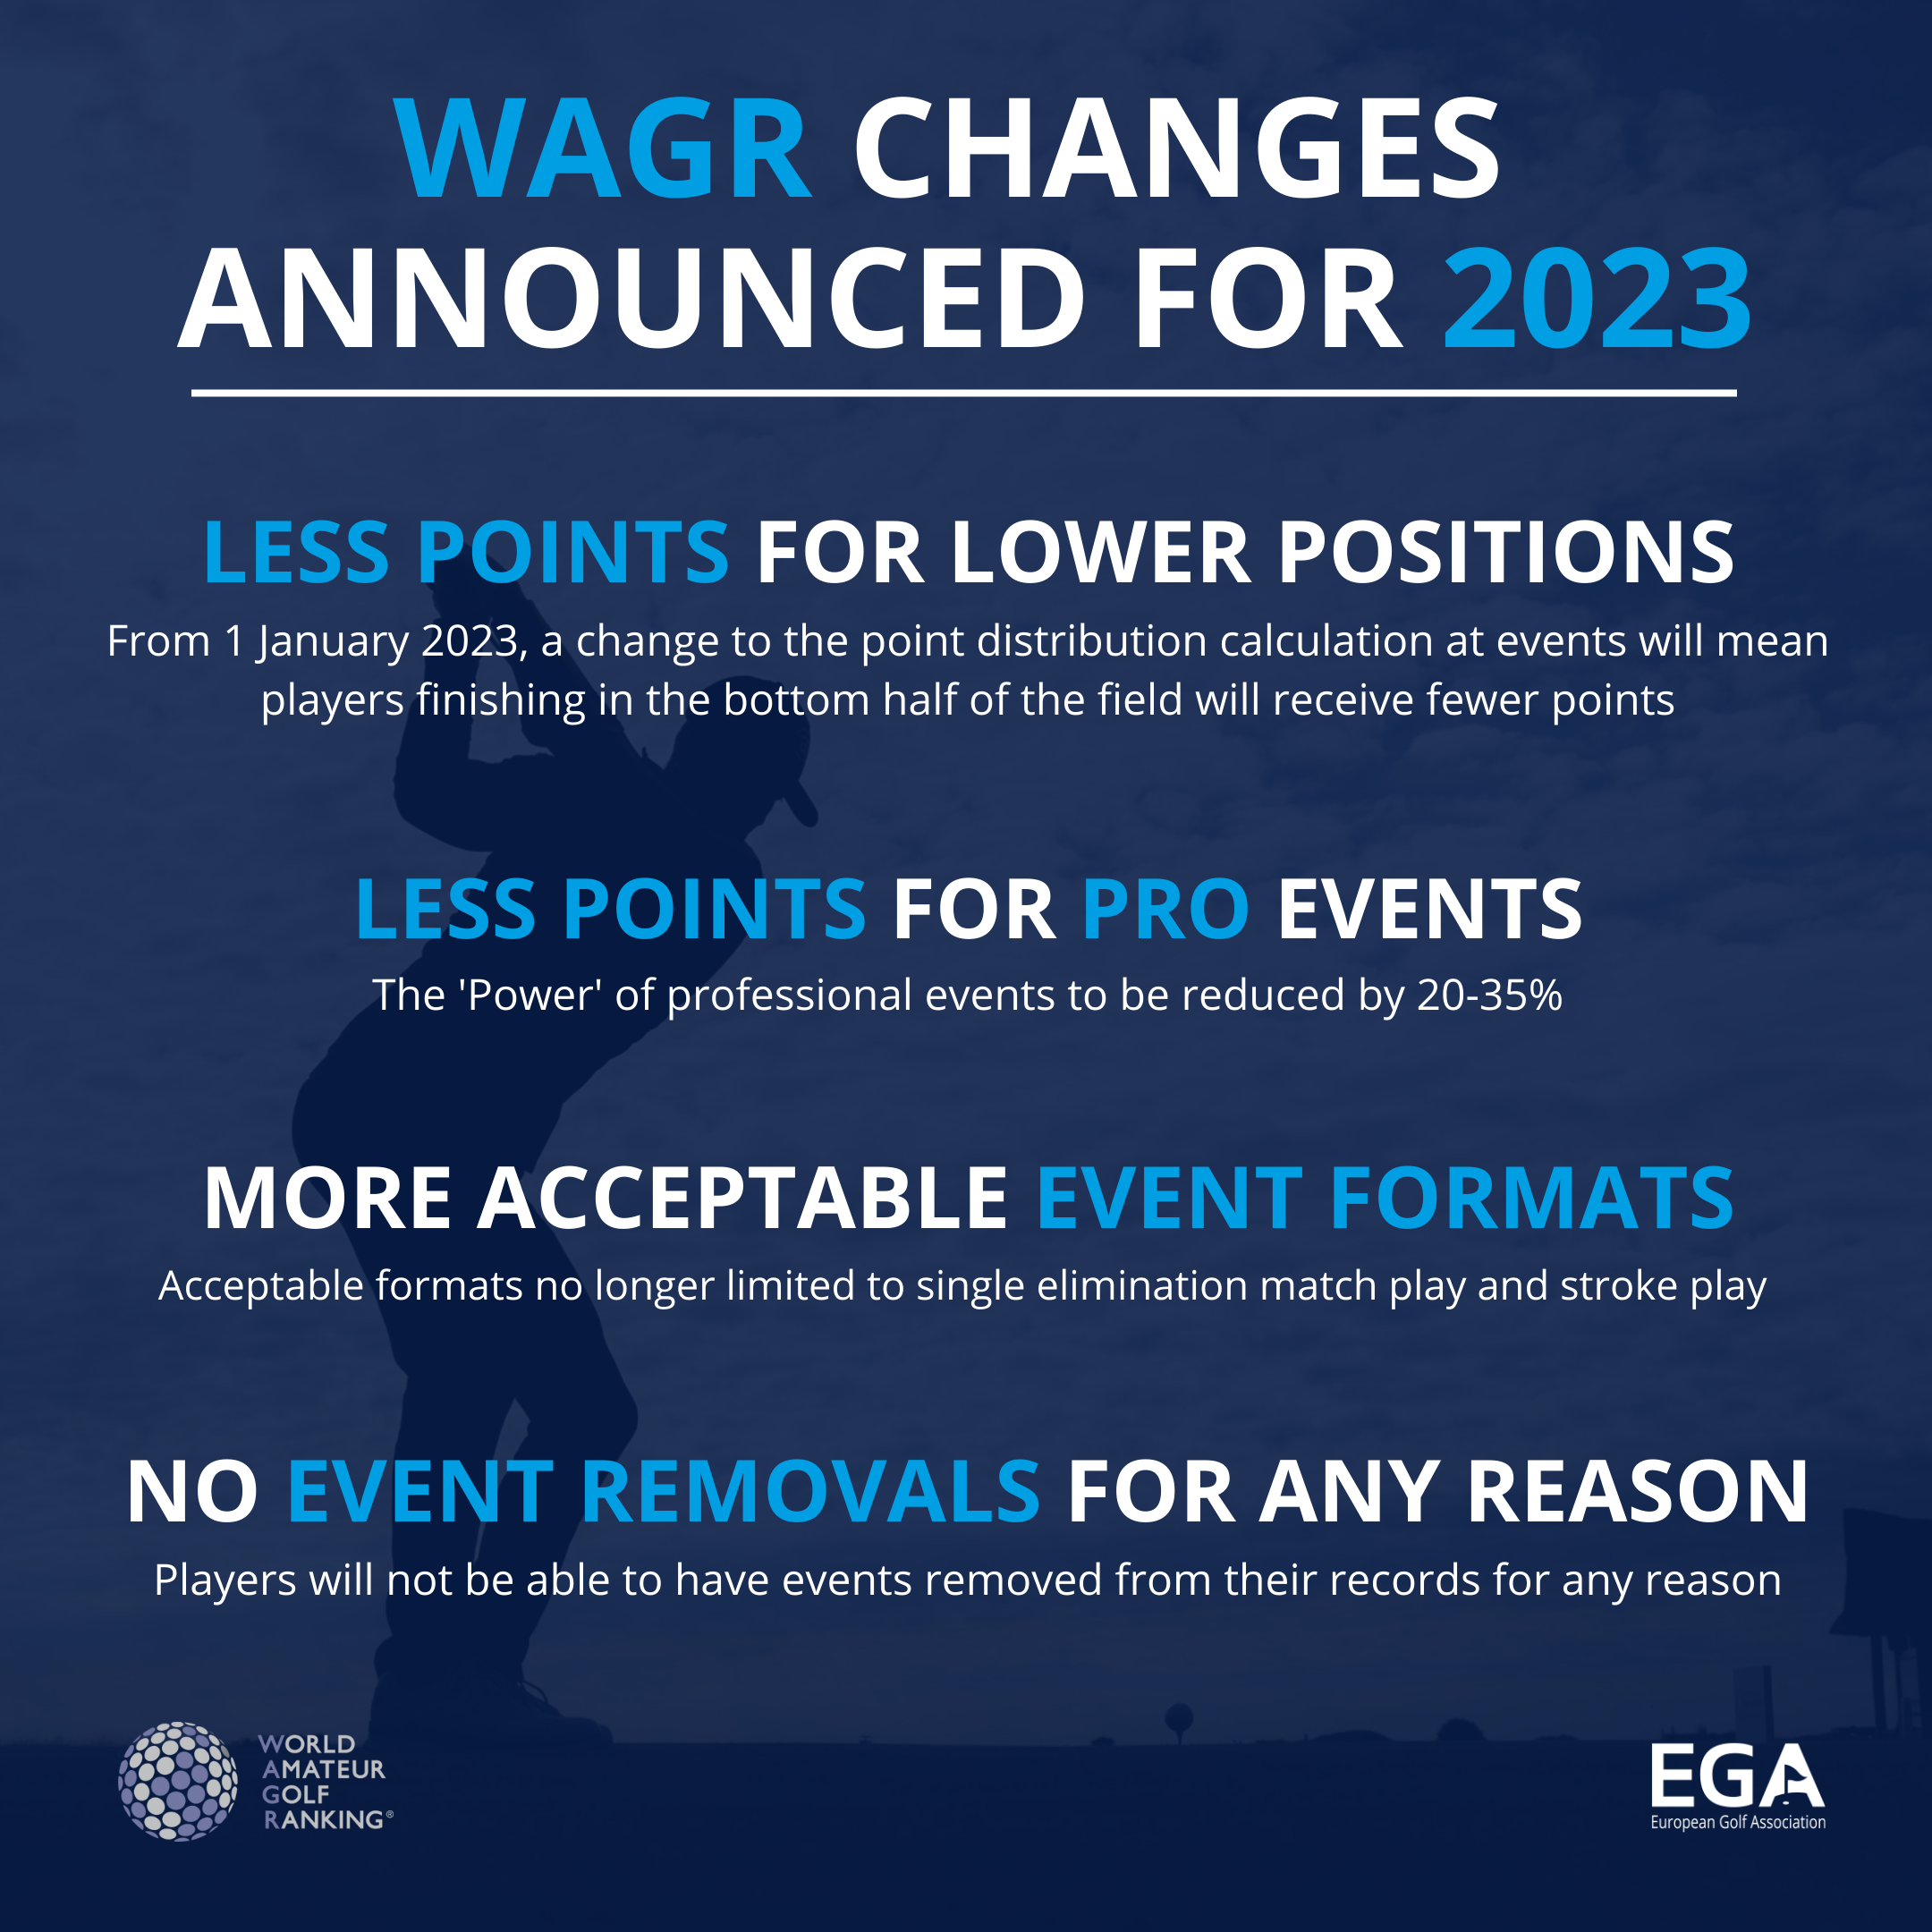 Changes to WAGR are Step in Right Direction - GolfNewsRI